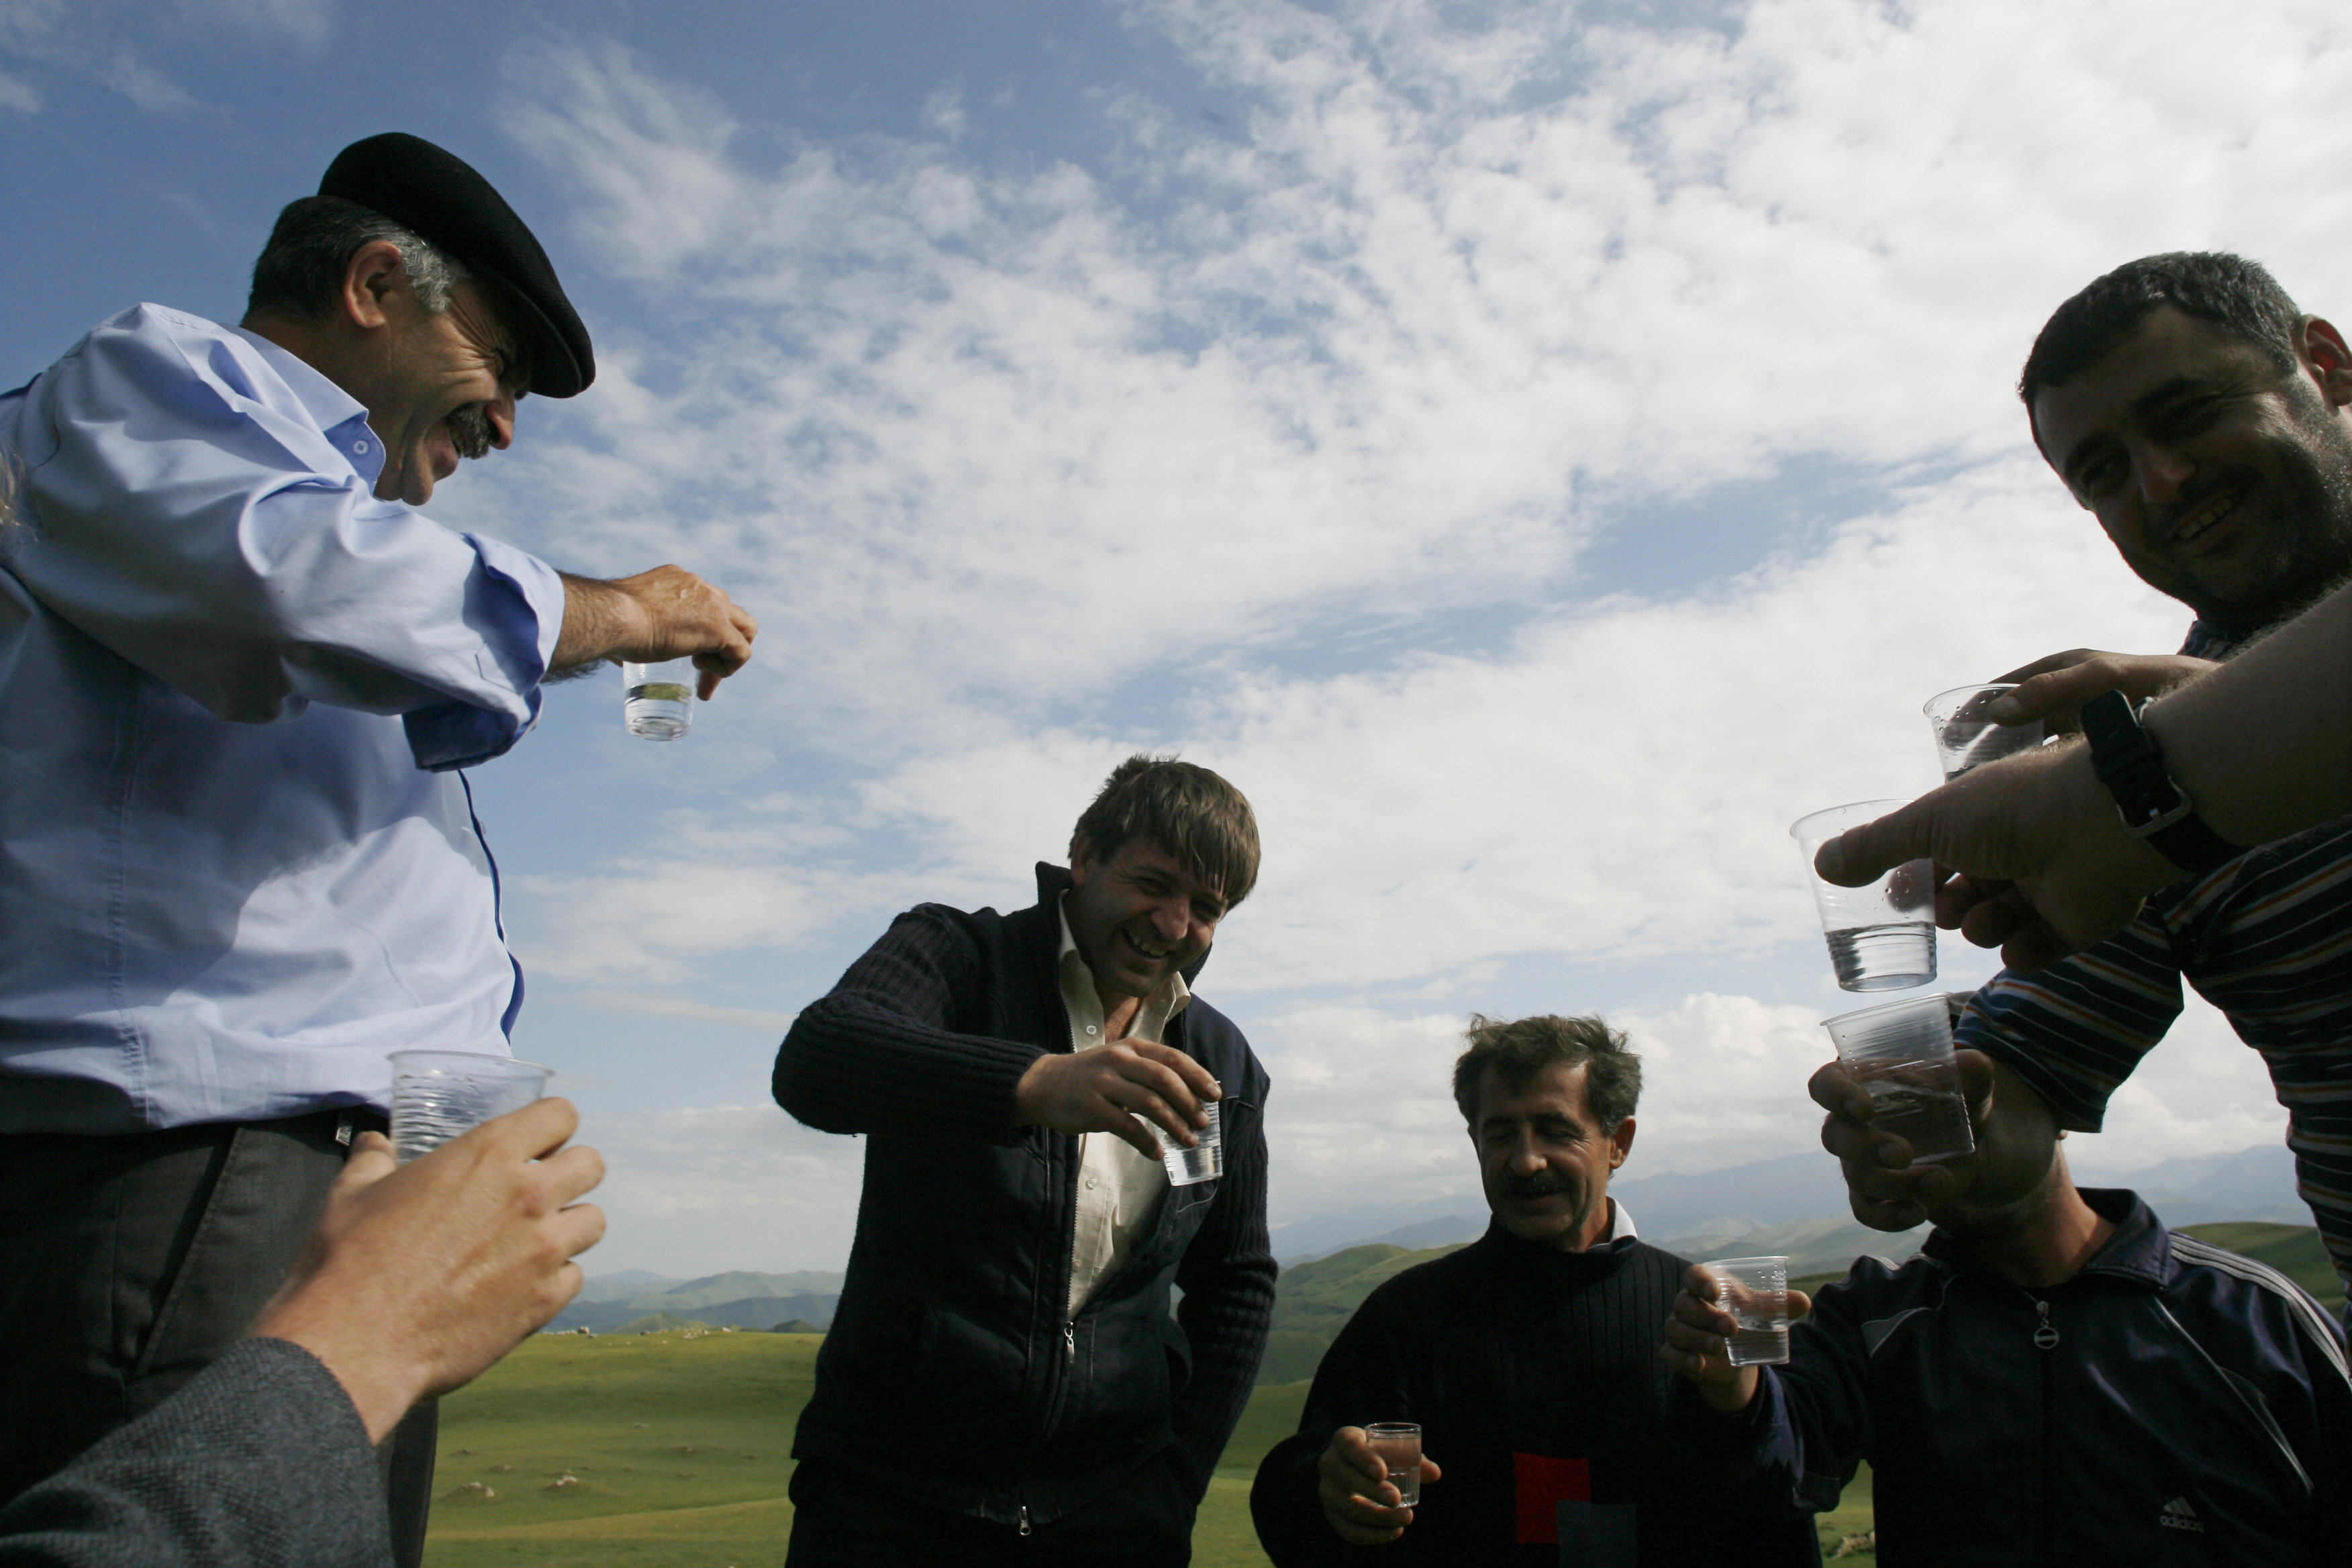 Men drink vodka near the remote mountain village of Tsovkra-1, some 3,000 metres above sea level in Russia's Caucasus region of Dagestan August 20, 2007. For children in this remote mountain village on Russia's southern fringe, after-school games means balancing on a wire suspended one storey above ground. By a quirk of history that goes so far back that in time no one really remembers, nearly every man, woman and child in Tsovkra-1 can walk the tightrope. Picture taken August 20, 2007. To match feature RUSSIA-DAGESTAN/TIGHTROPE REUTERS/Thomas Peter (RUSSIA) - RTR1T7PW